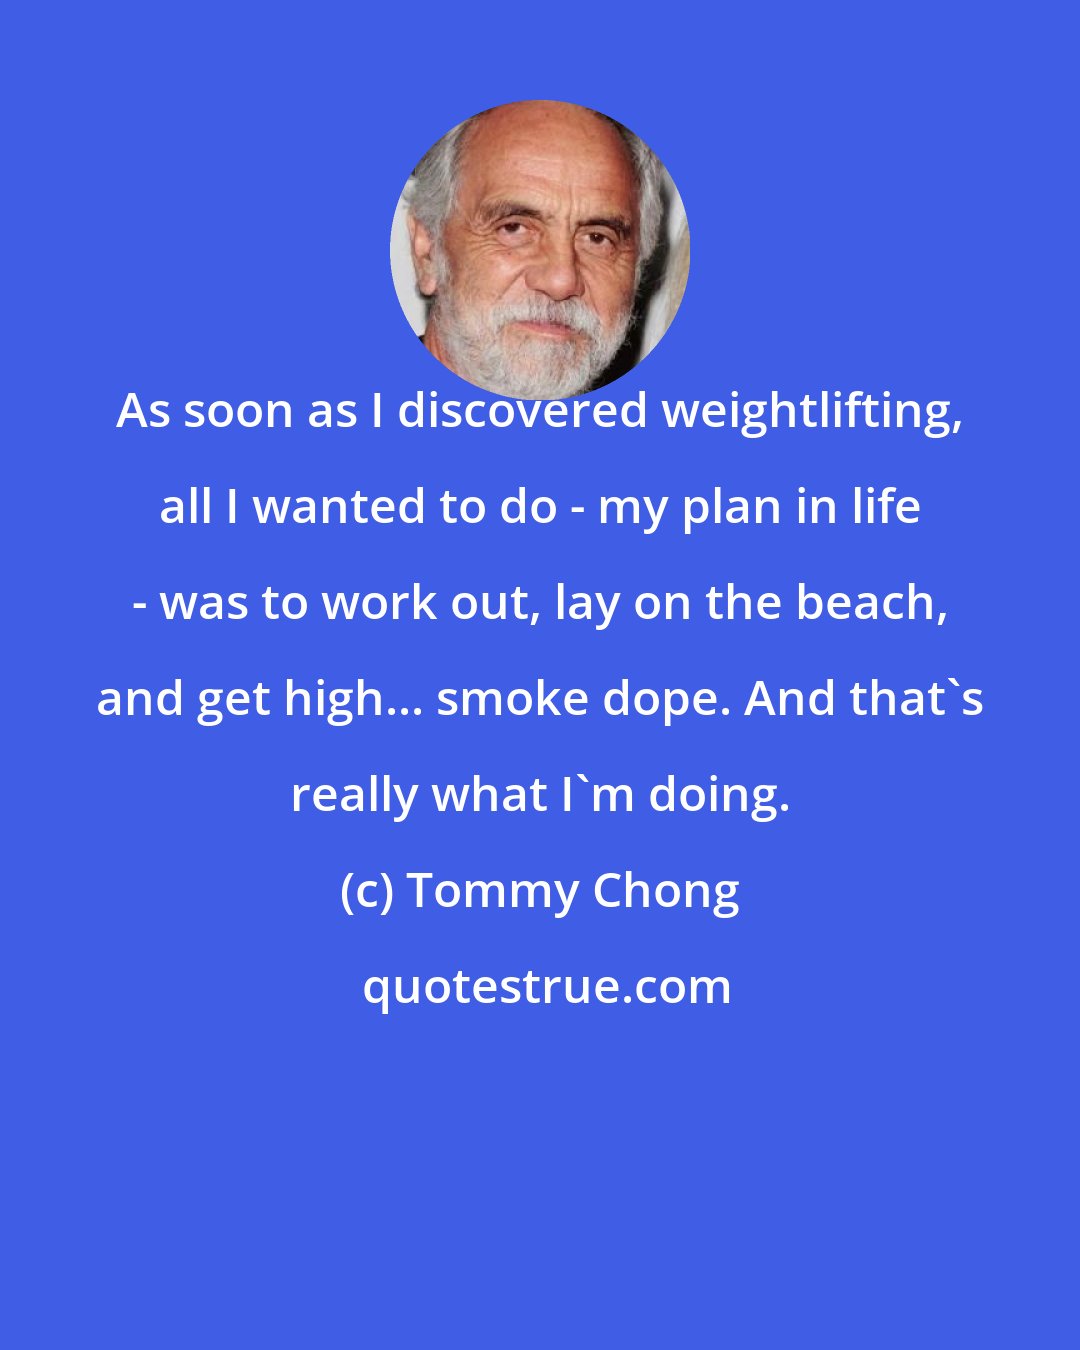 Tommy Chong: As soon as I discovered weightlifting, all I wanted to do - my plan in life - was to work out, lay on the beach, and get high... smoke dope. And that's really what I'm doing.